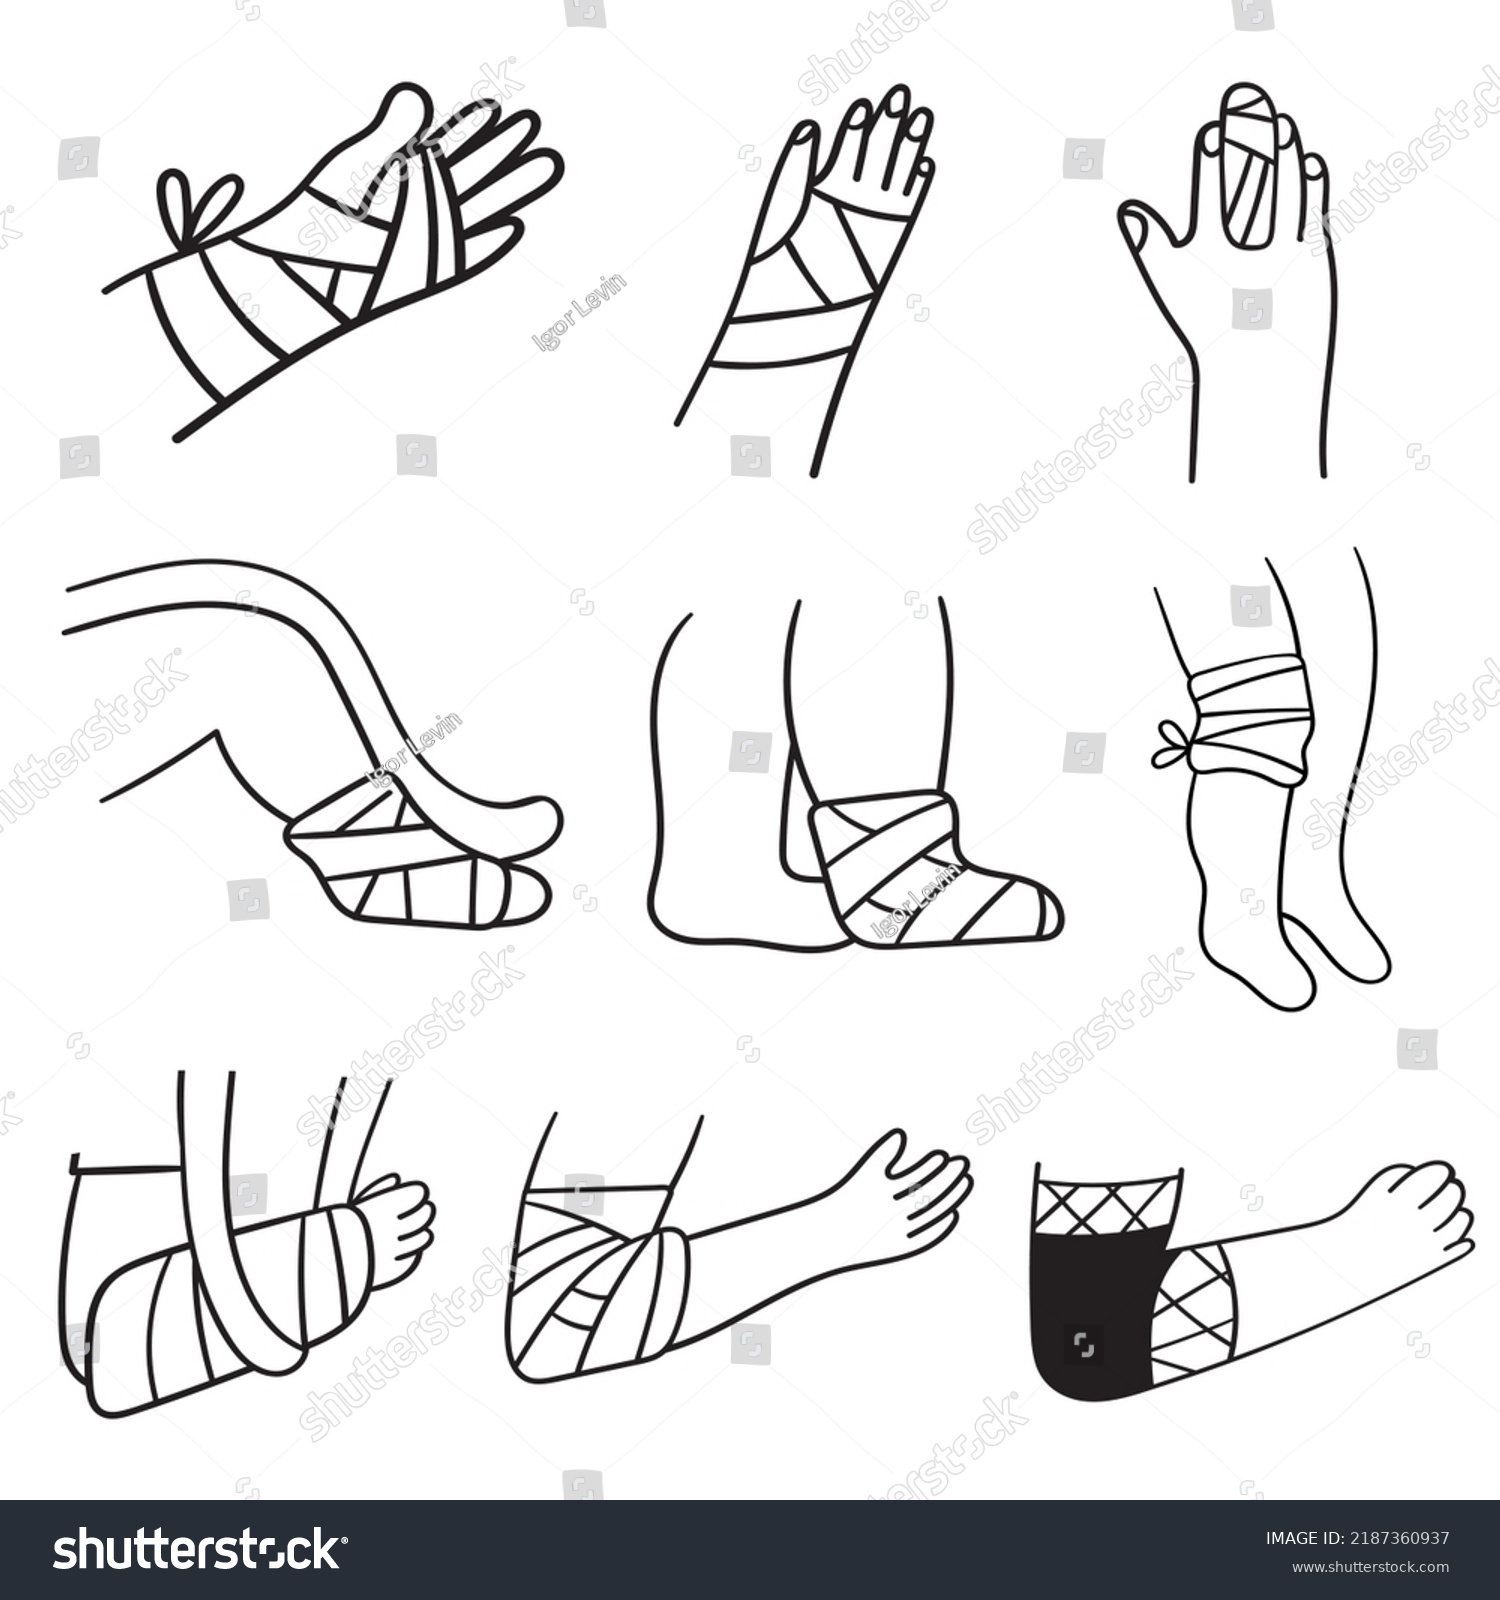 SVG of Bandage on hands, legs, arms. Collection of outline icons. Injury. Illustrations on white background. svg